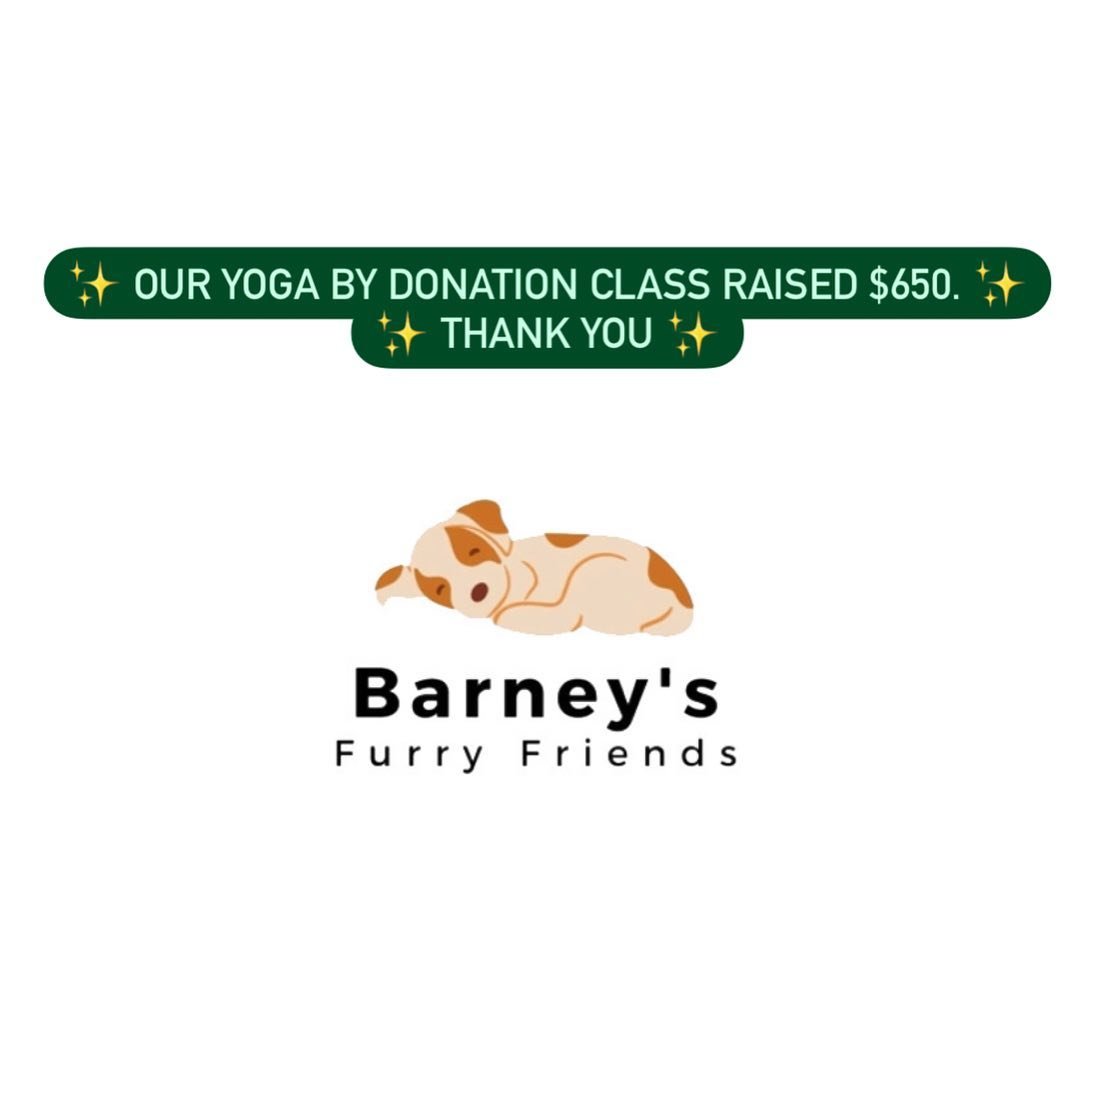 🐾 Thank you to everyone in our sweet yoga community who showed up to our by donation yoga class today for @barneysfurryfriends 
🐾 We are incredibly grateful to @sadhanayogaandsound for allowing us to use the space and supporting this event.
🐾 Than